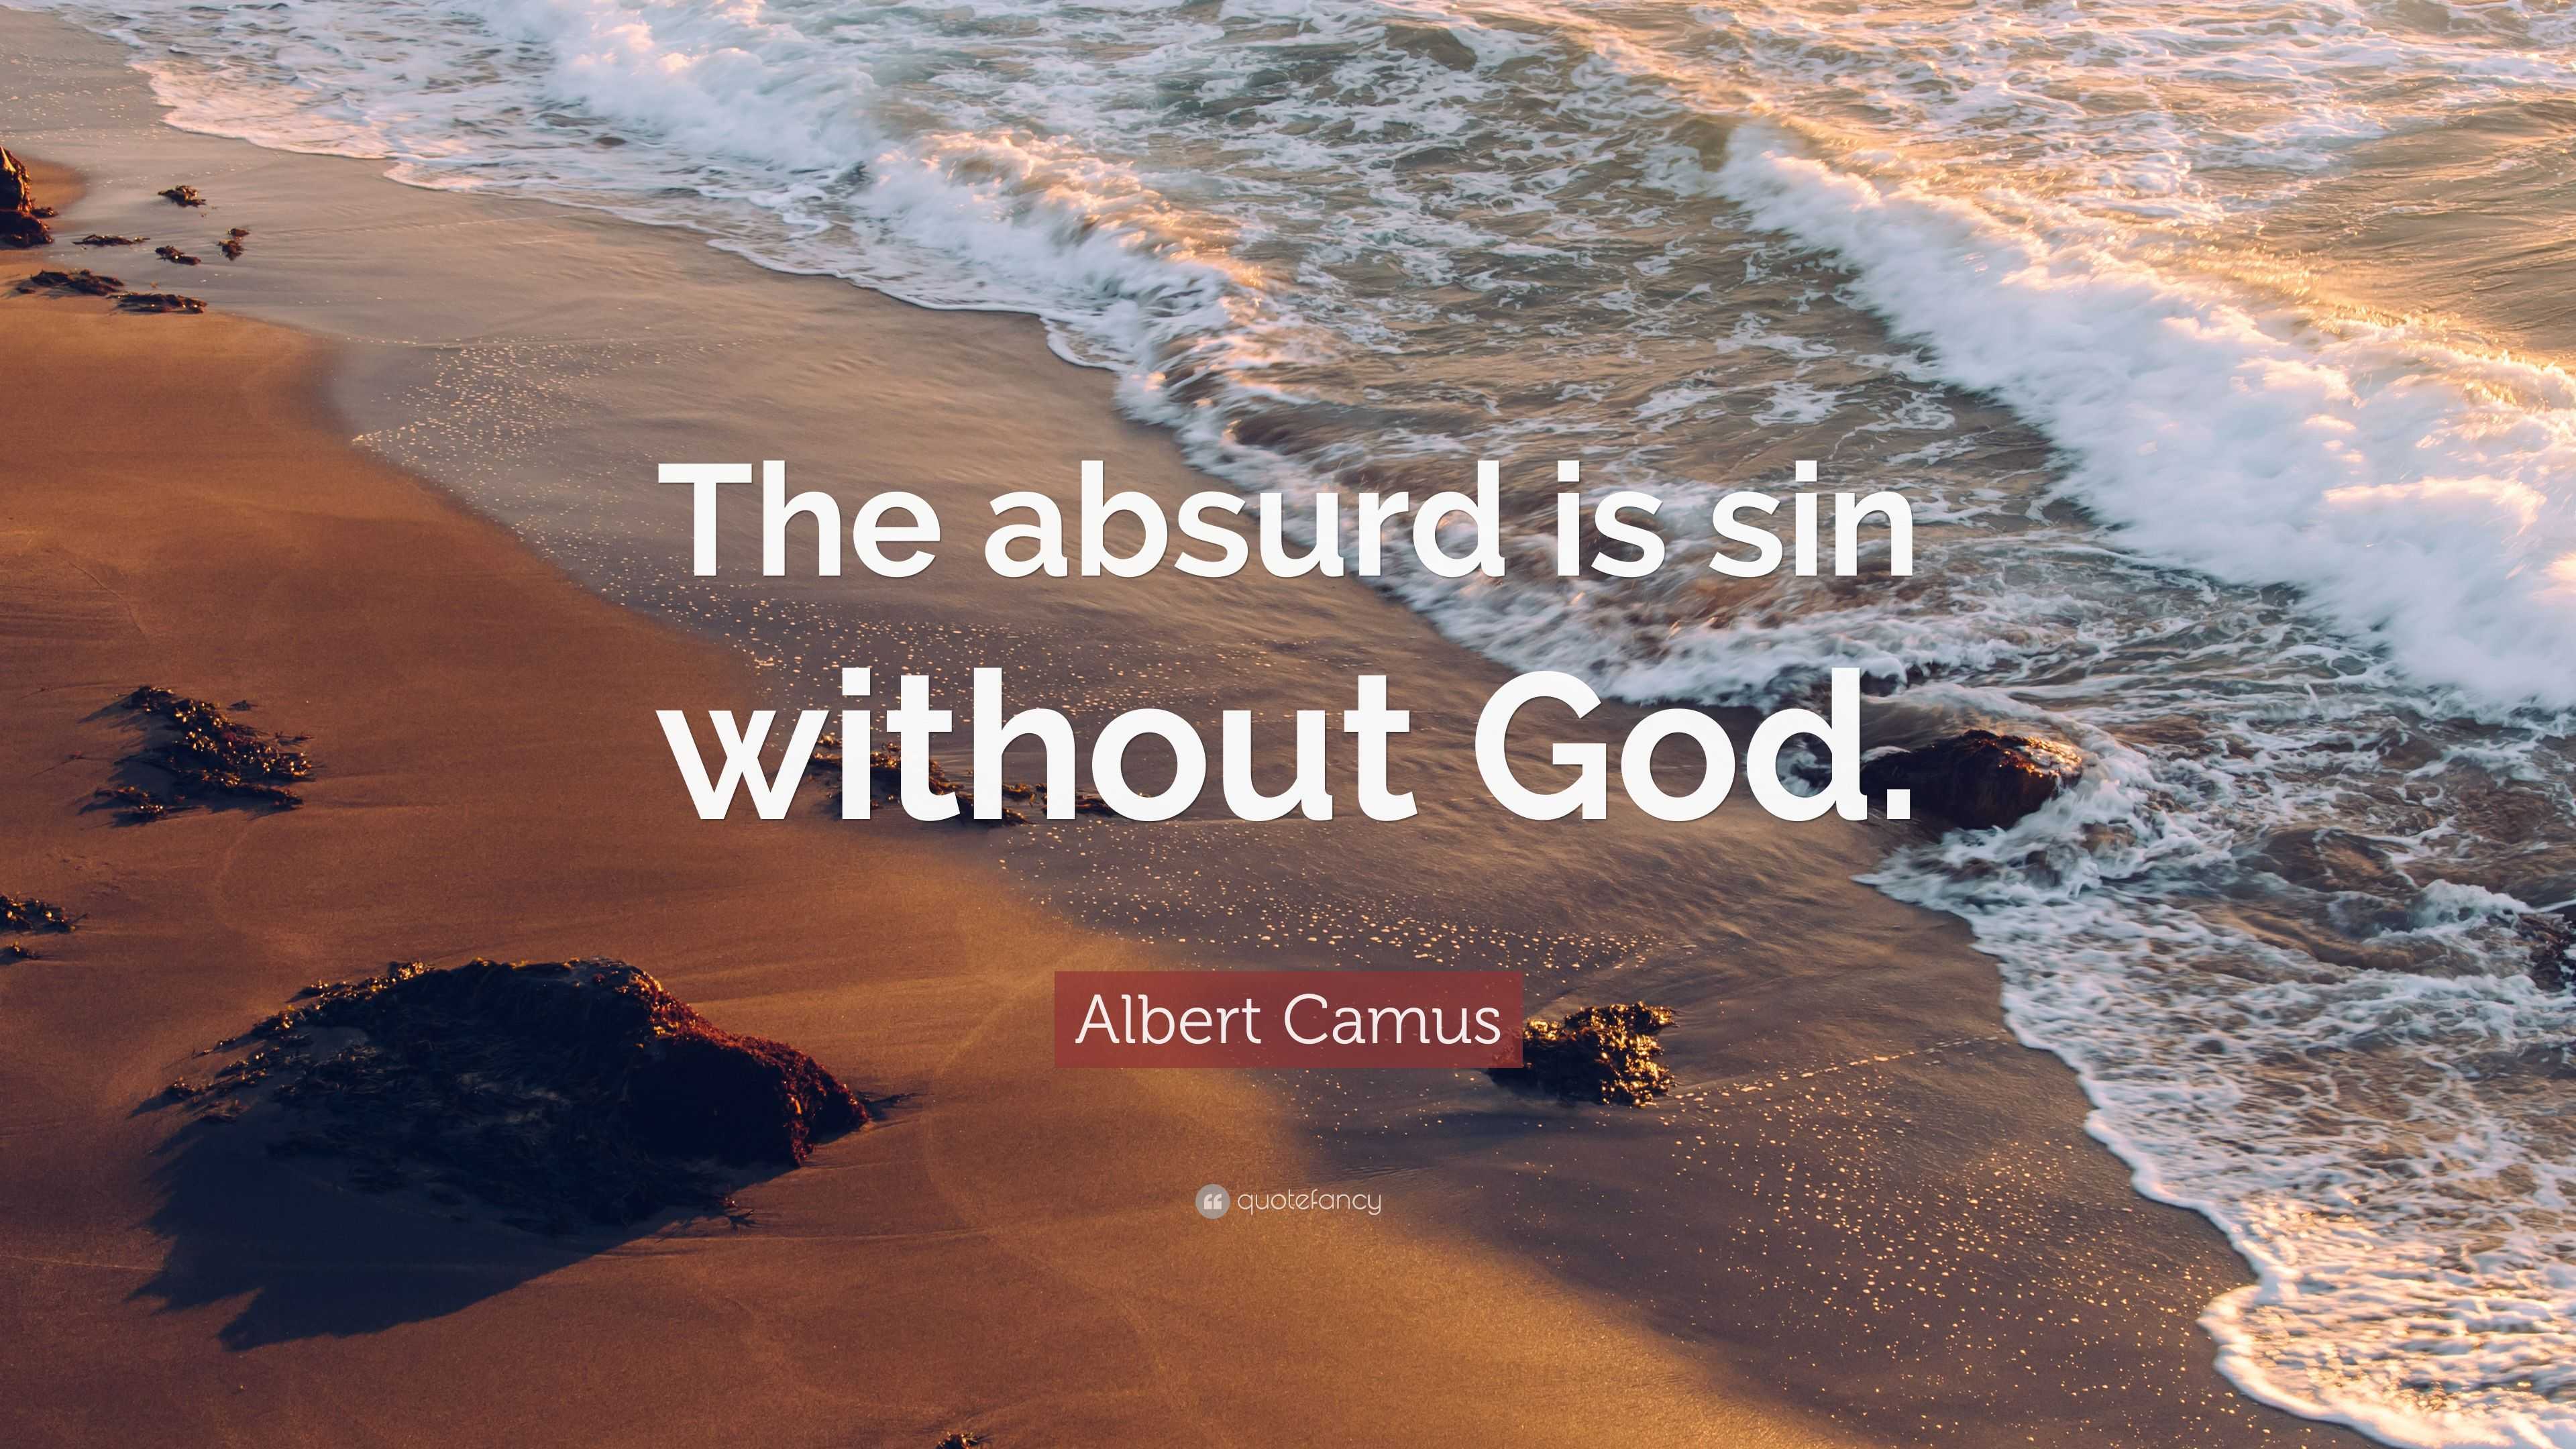 Albert Camus Quote: “The absurd is sin without God.”